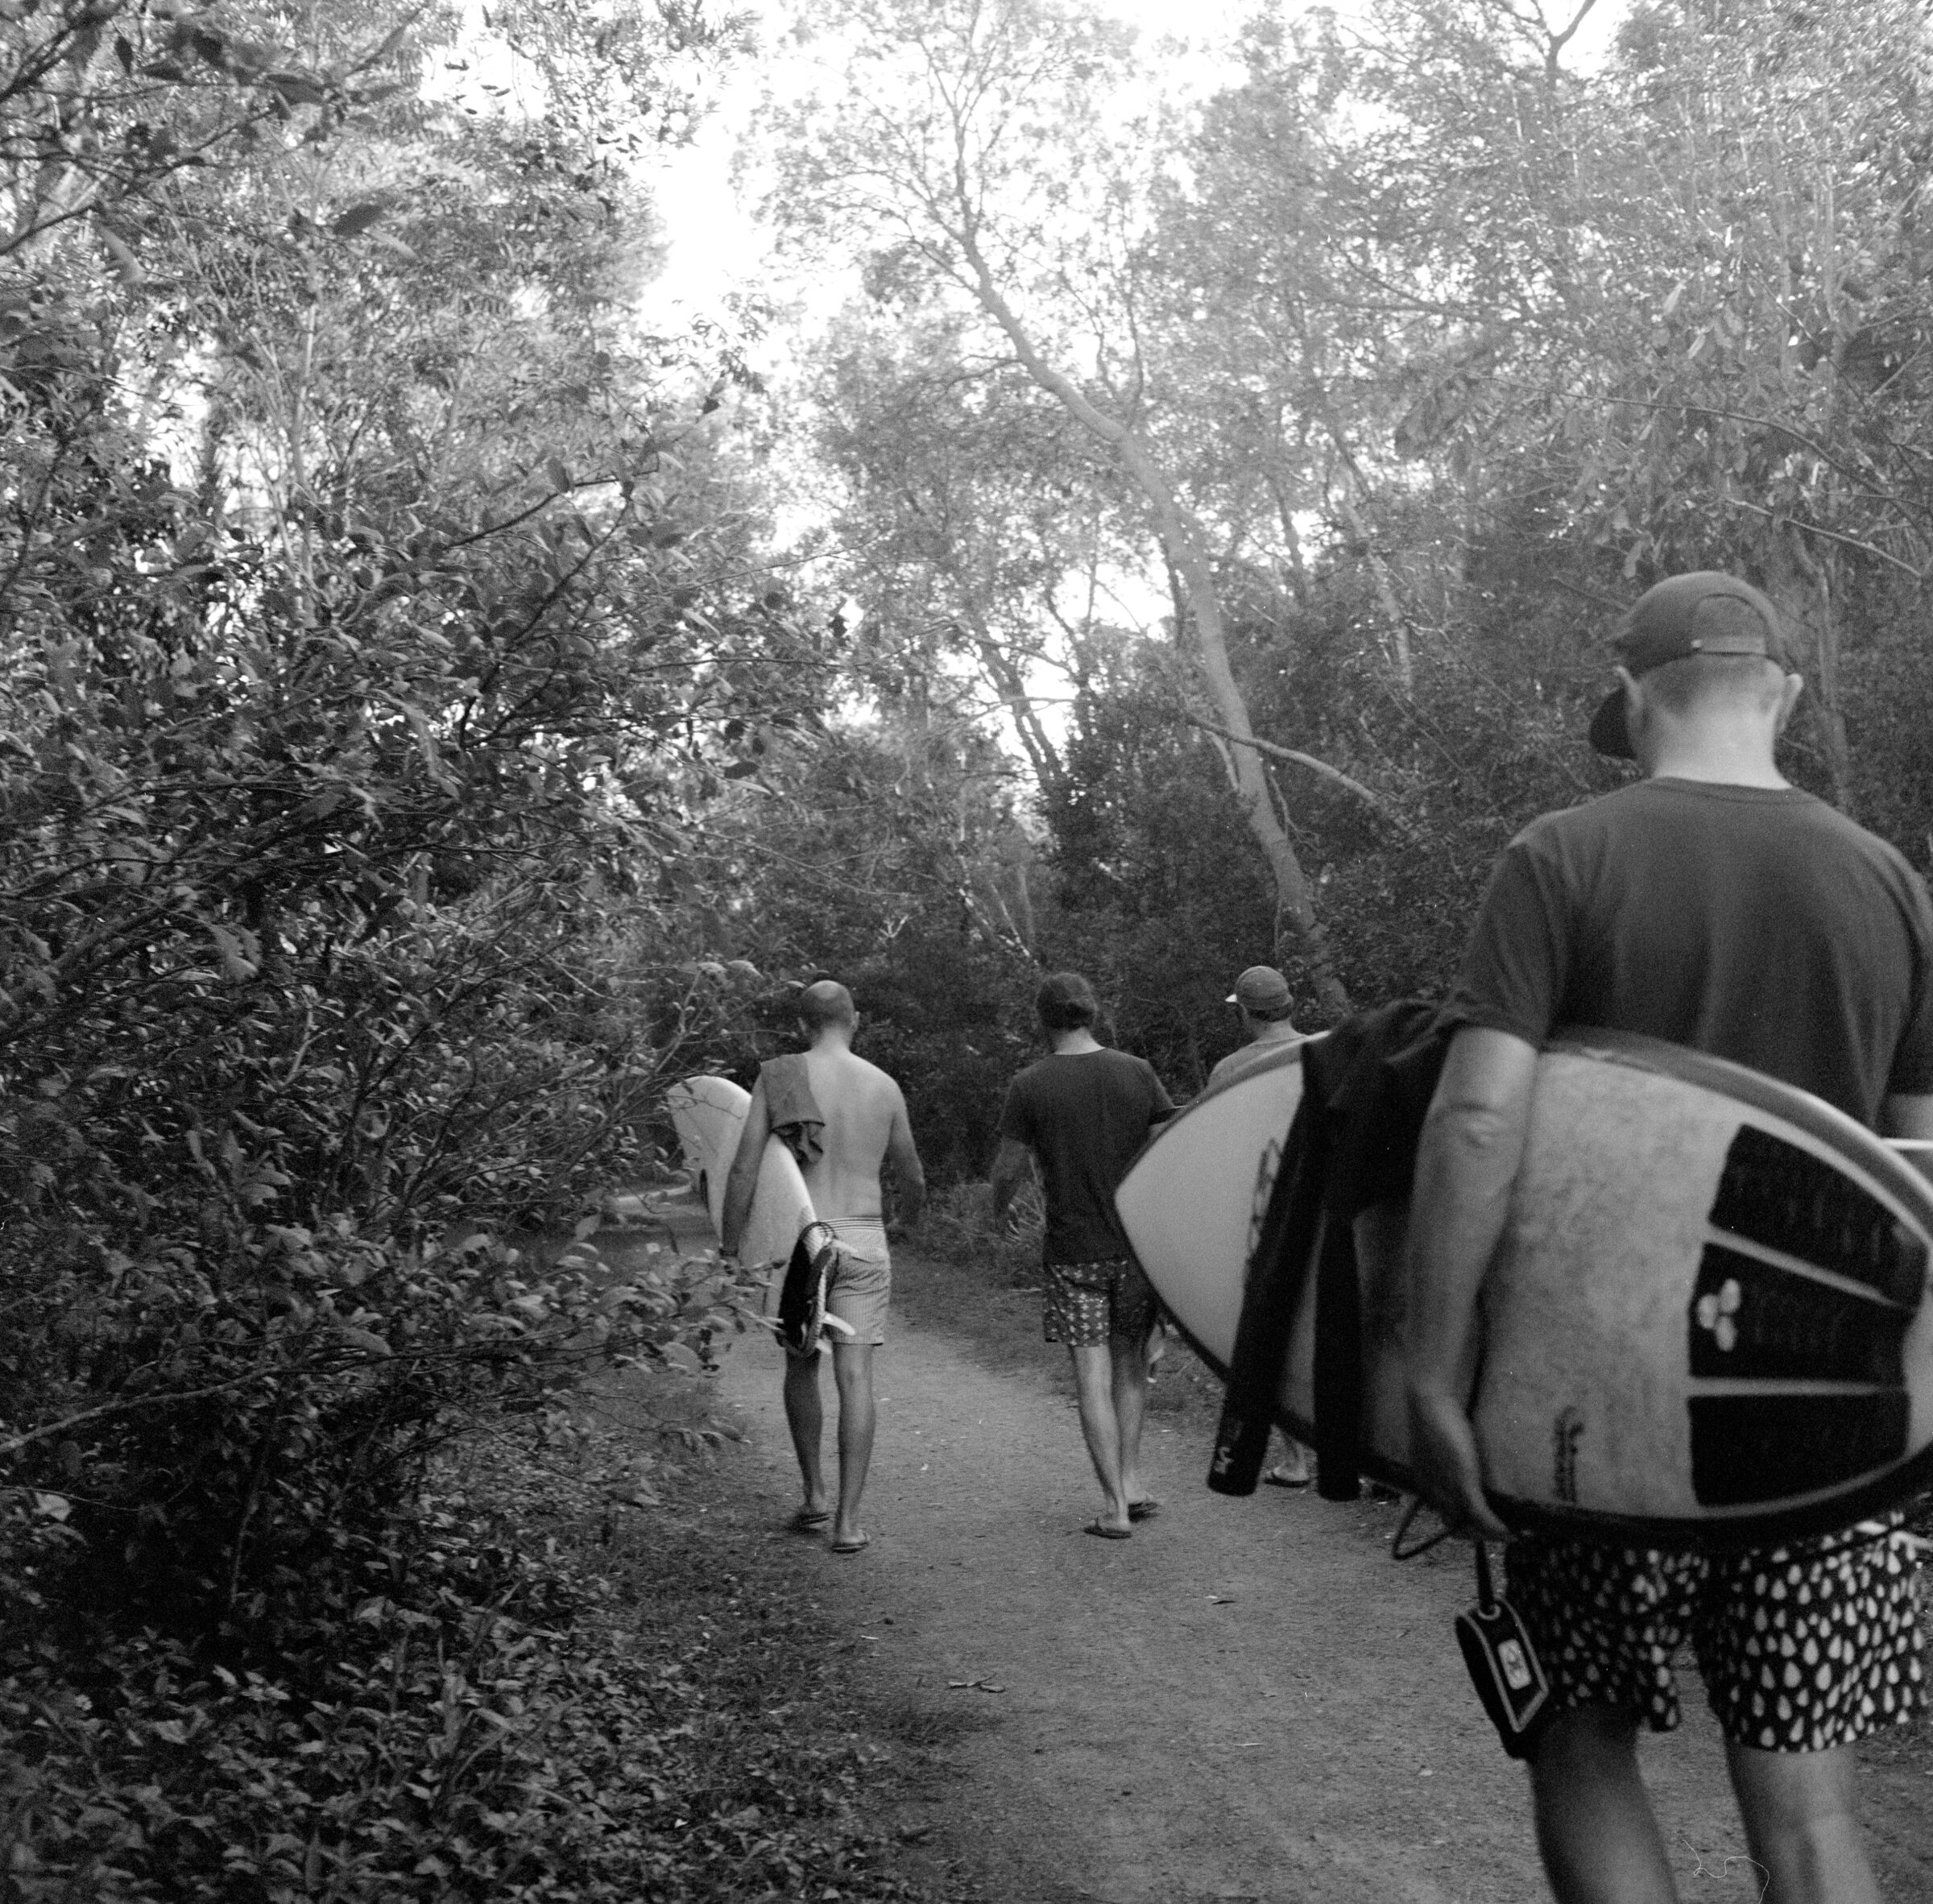 On the way to the surf in Byron Bay. On 120 film.